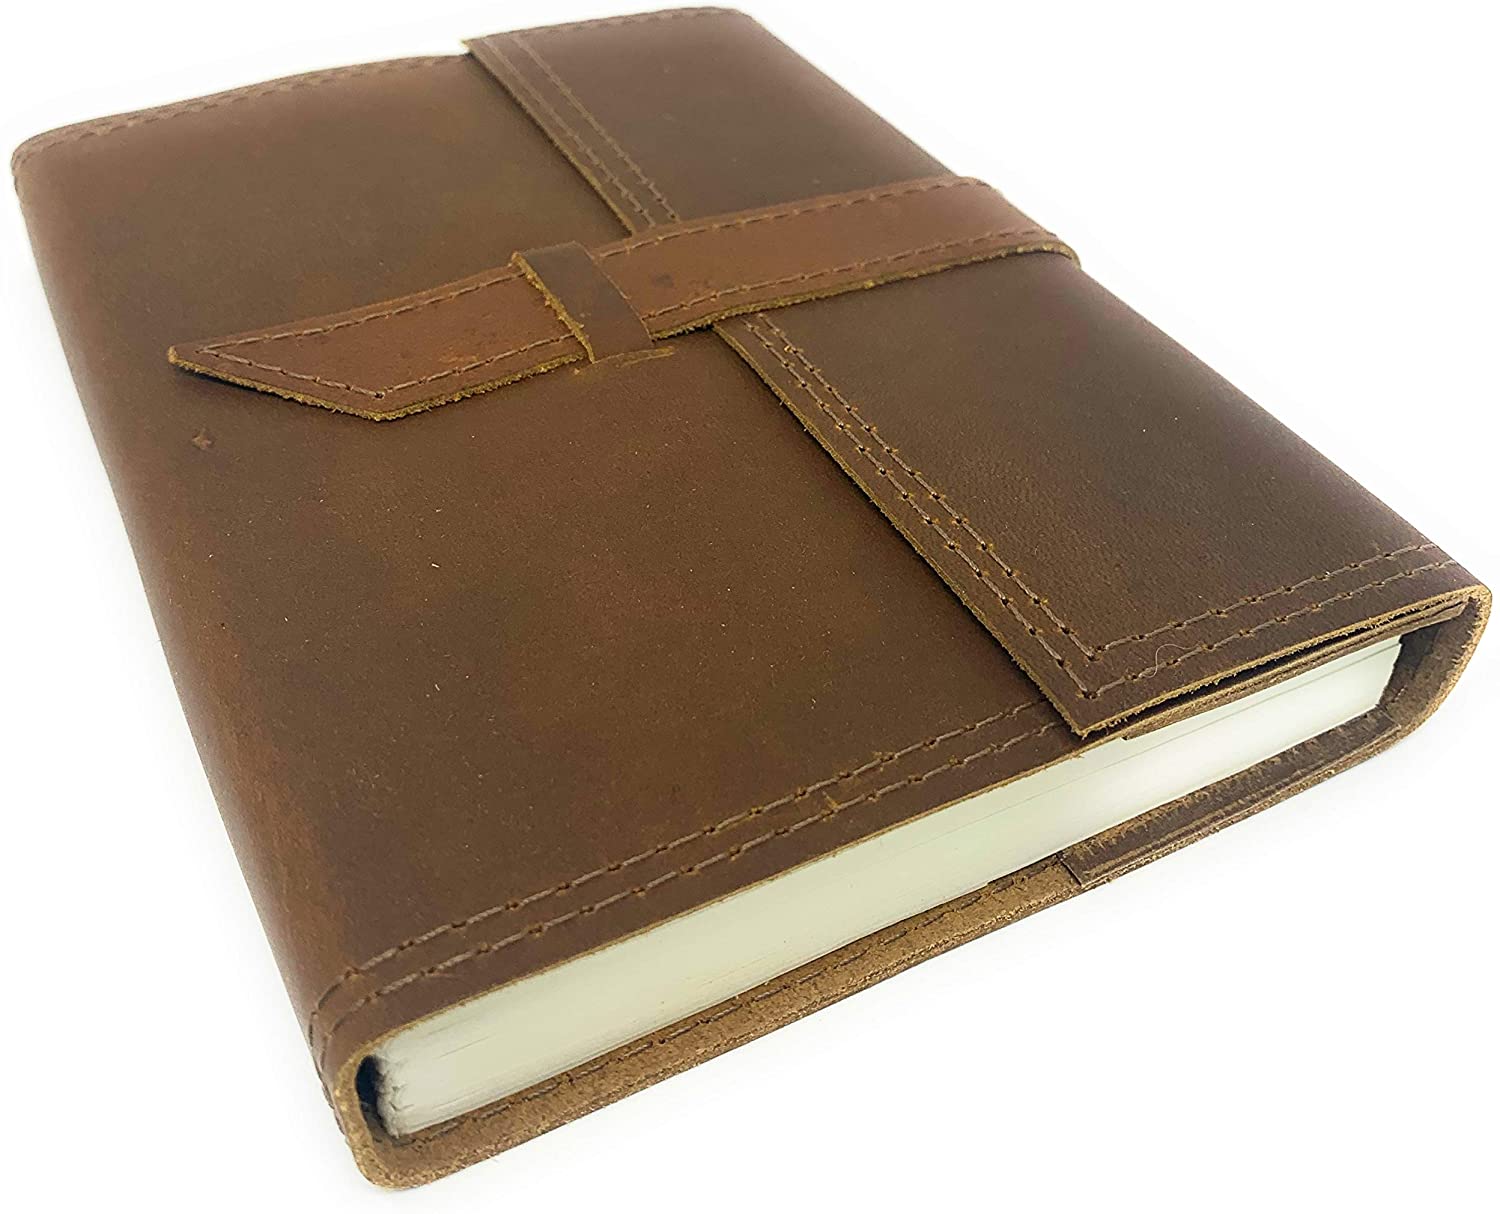 Tuk Tuk Press® Knight Edition, Handmade Genuine Buffalo Leather Notebook  Journal, Smooth Brown Finish, 200 Thick Recycled Blank Cotton Pages